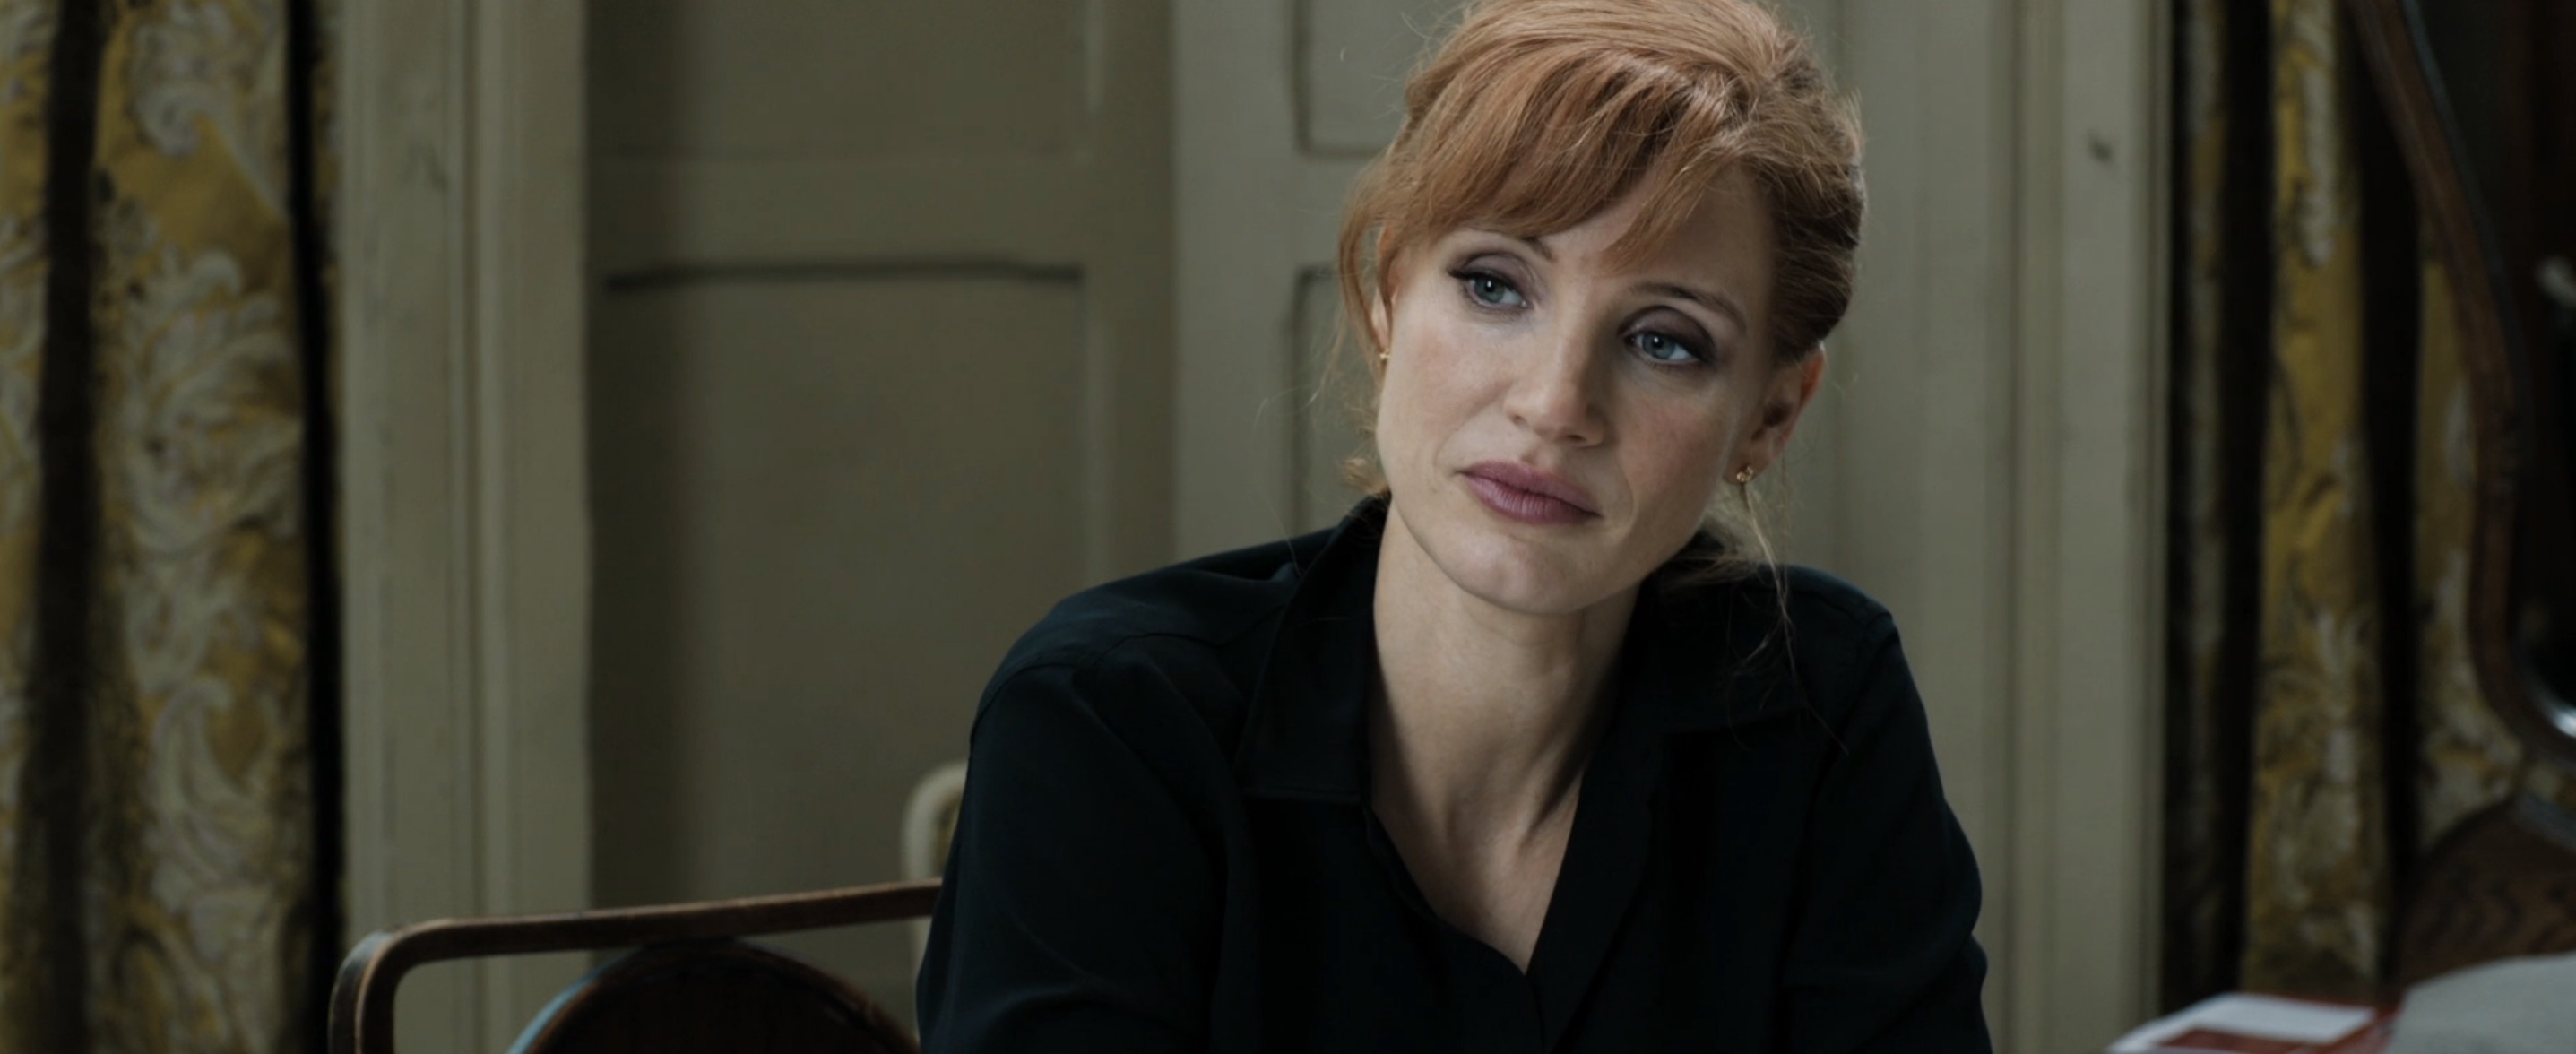 The 355 Cast - Jessica Chastain as Mace Browne